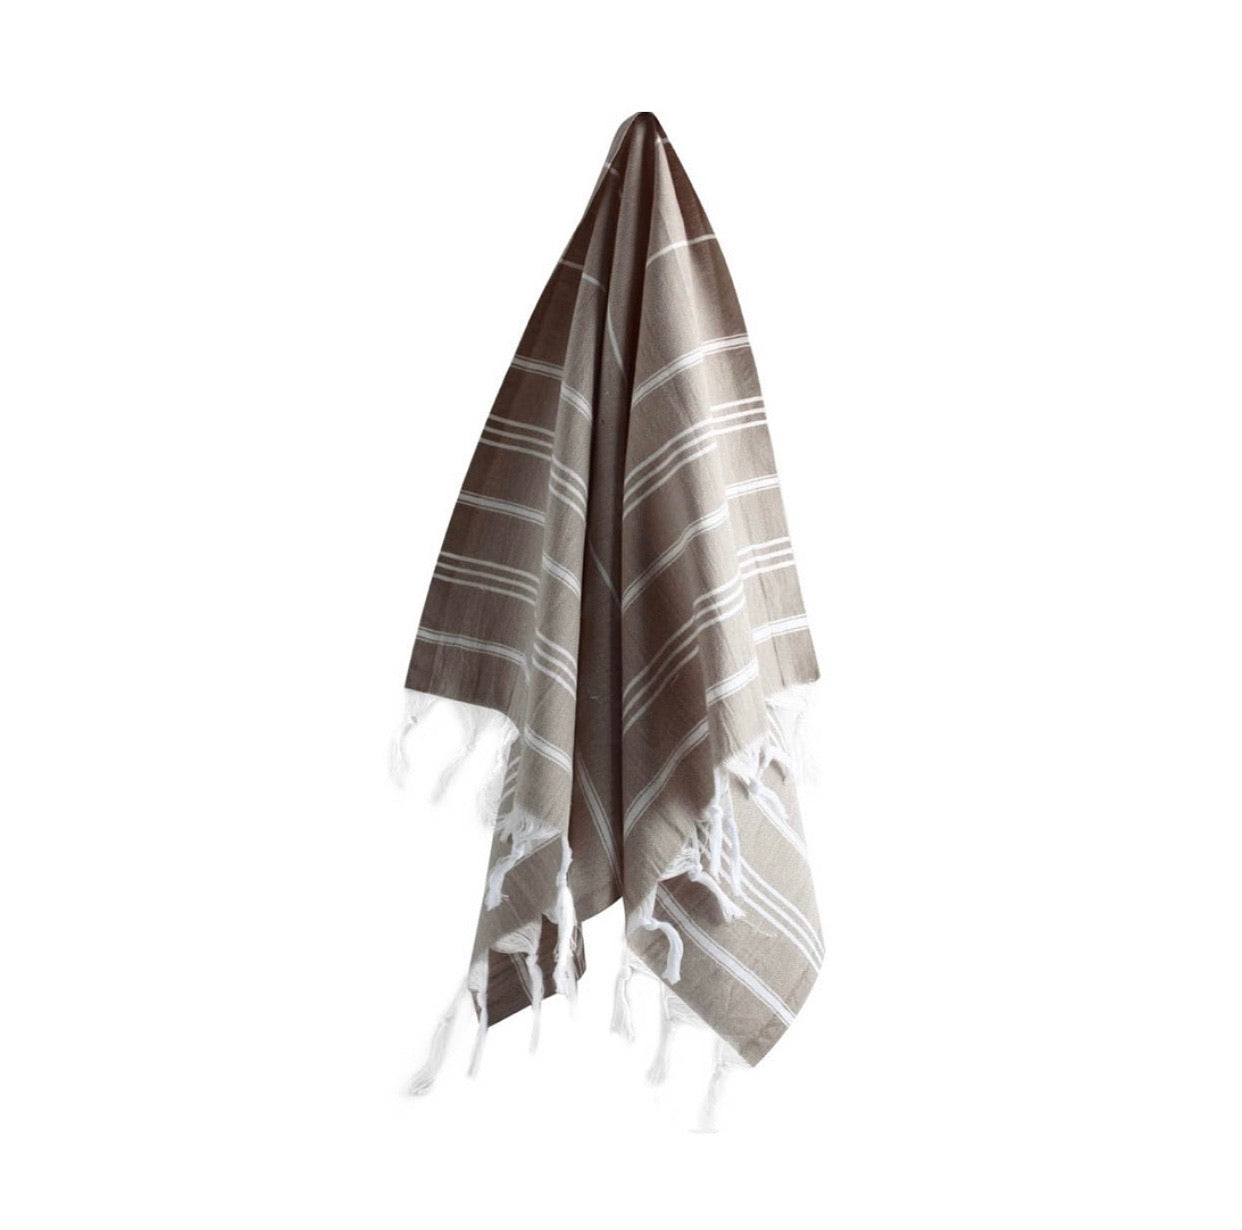 Turkish cotton hand towel in Cafe. Known for its softness, absorbency, quick dry, and antimicrobial properties.